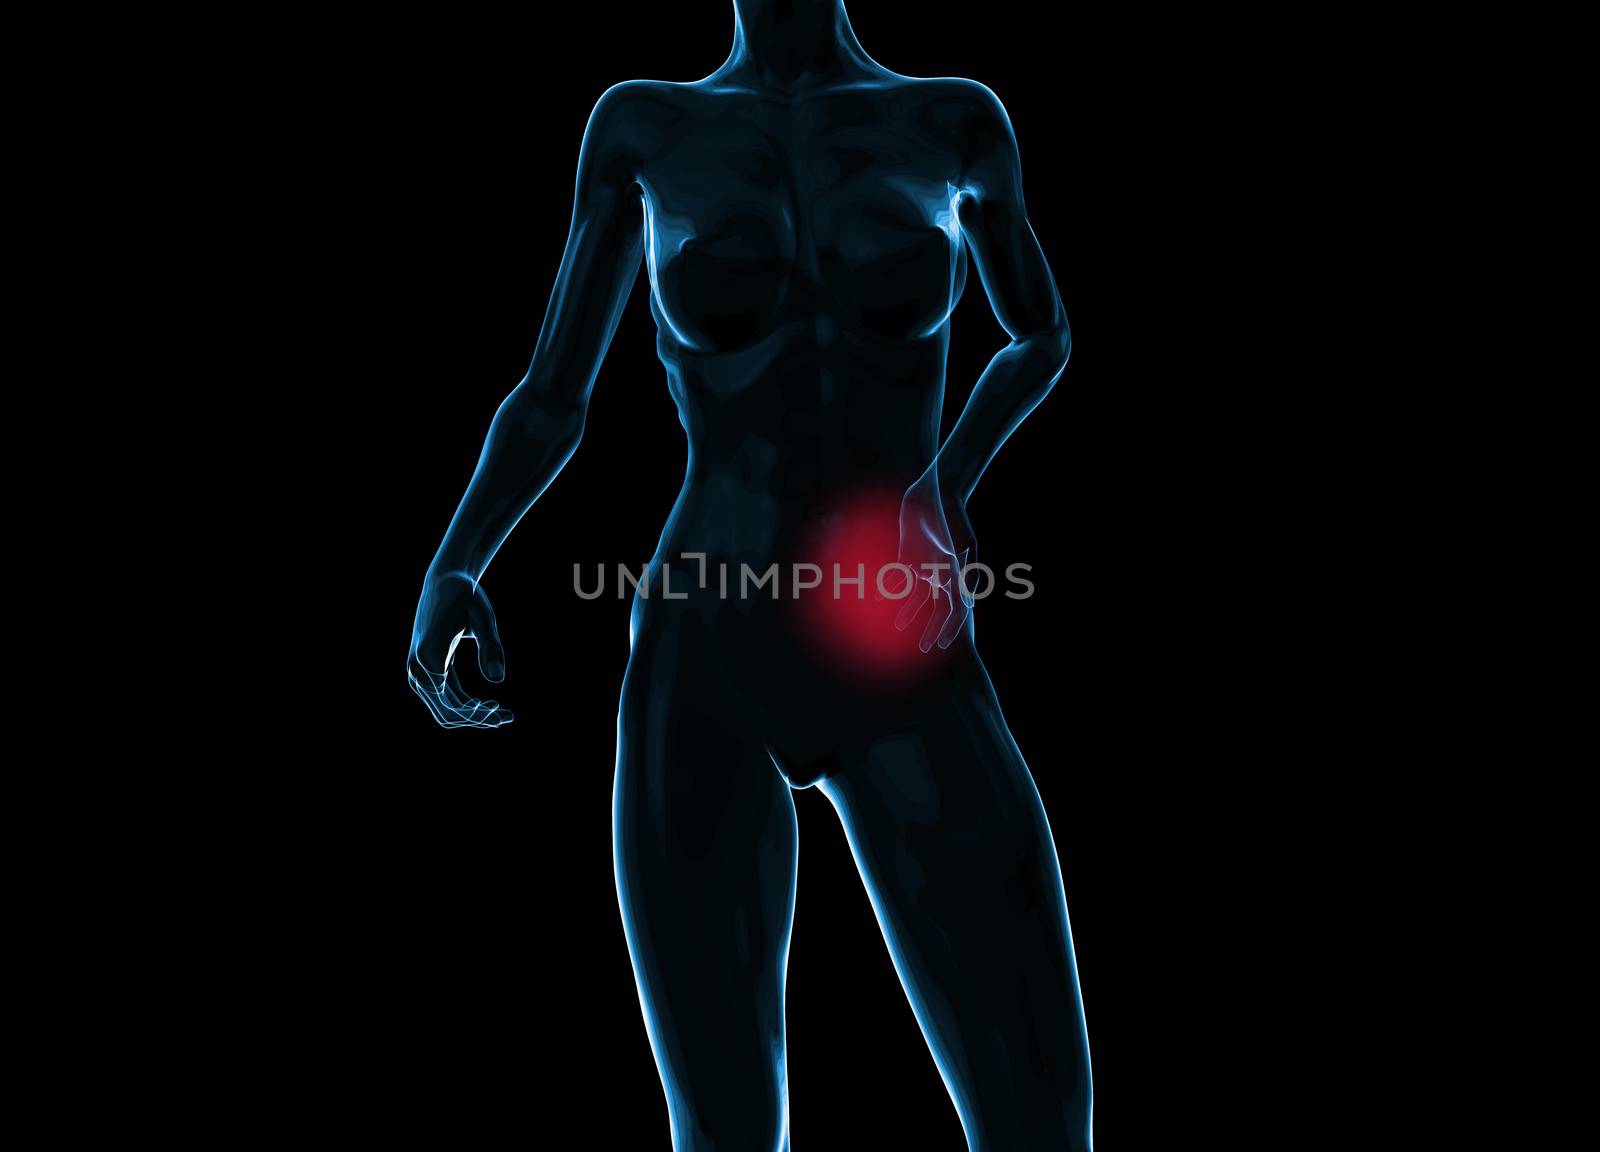 Female woman torso made of glass or bubble, pain in the back isolated on black background. 3d rendered medical illustration by skrotov